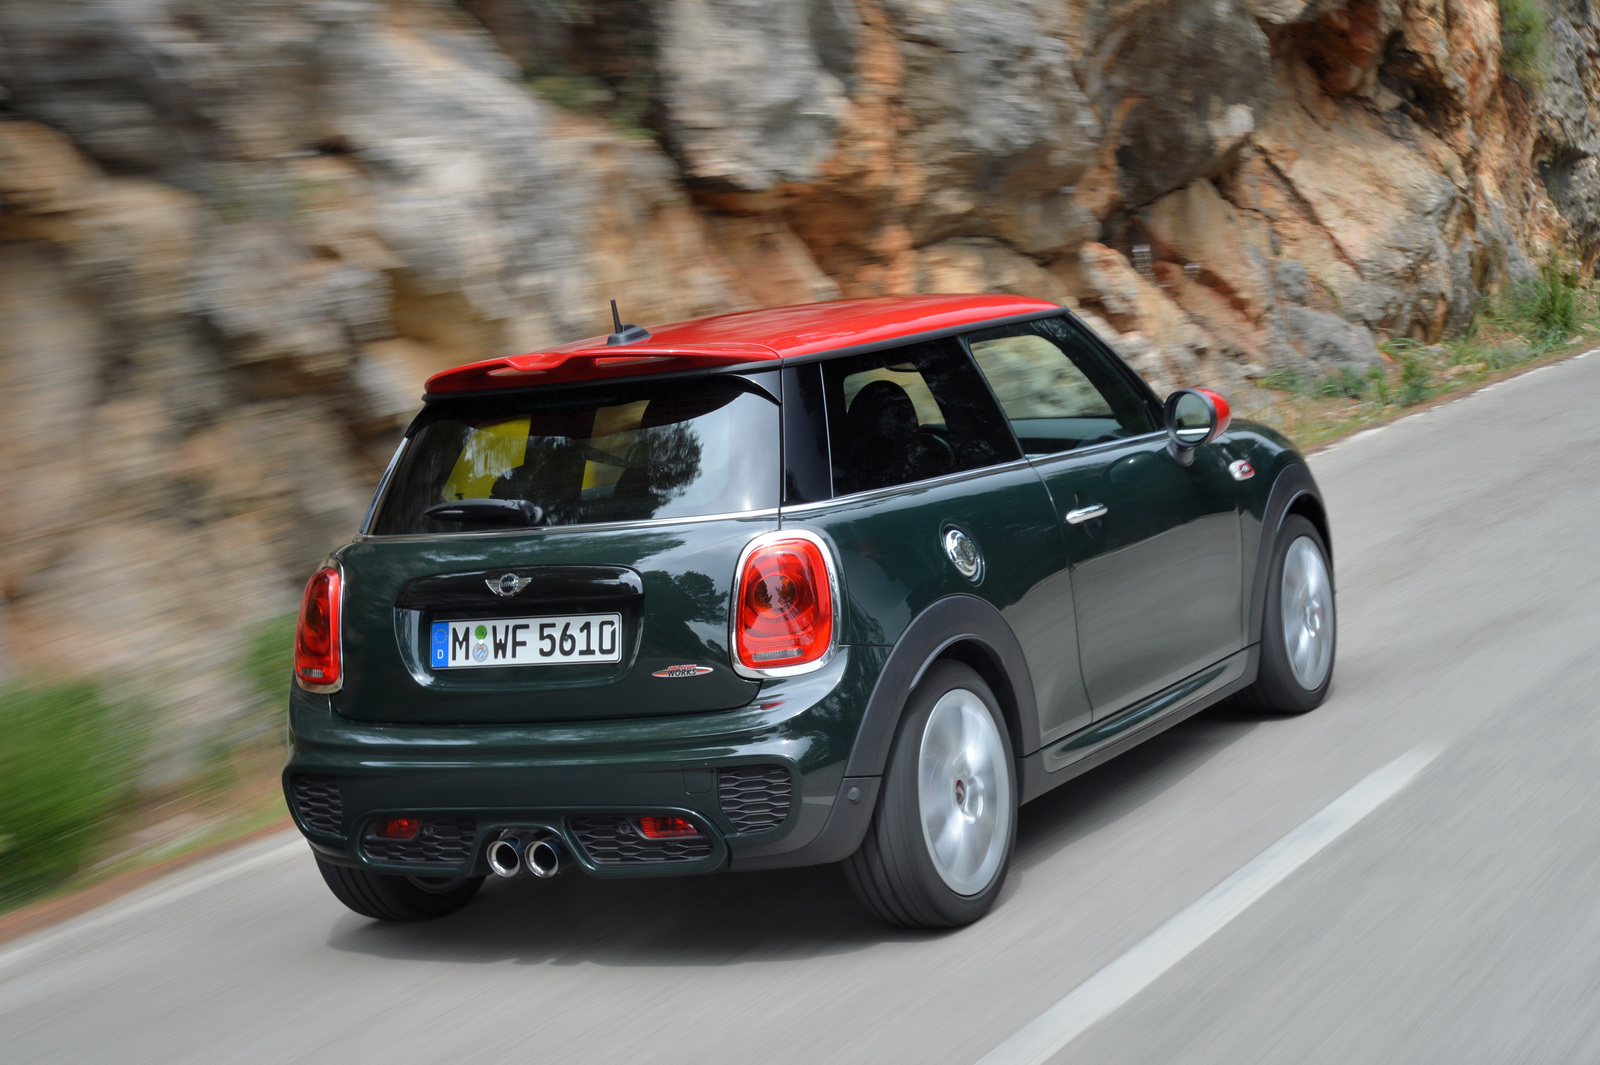 2015 Mini JCW Hatch Priced From £23,050 In The UK, €31,750 in Germany ...